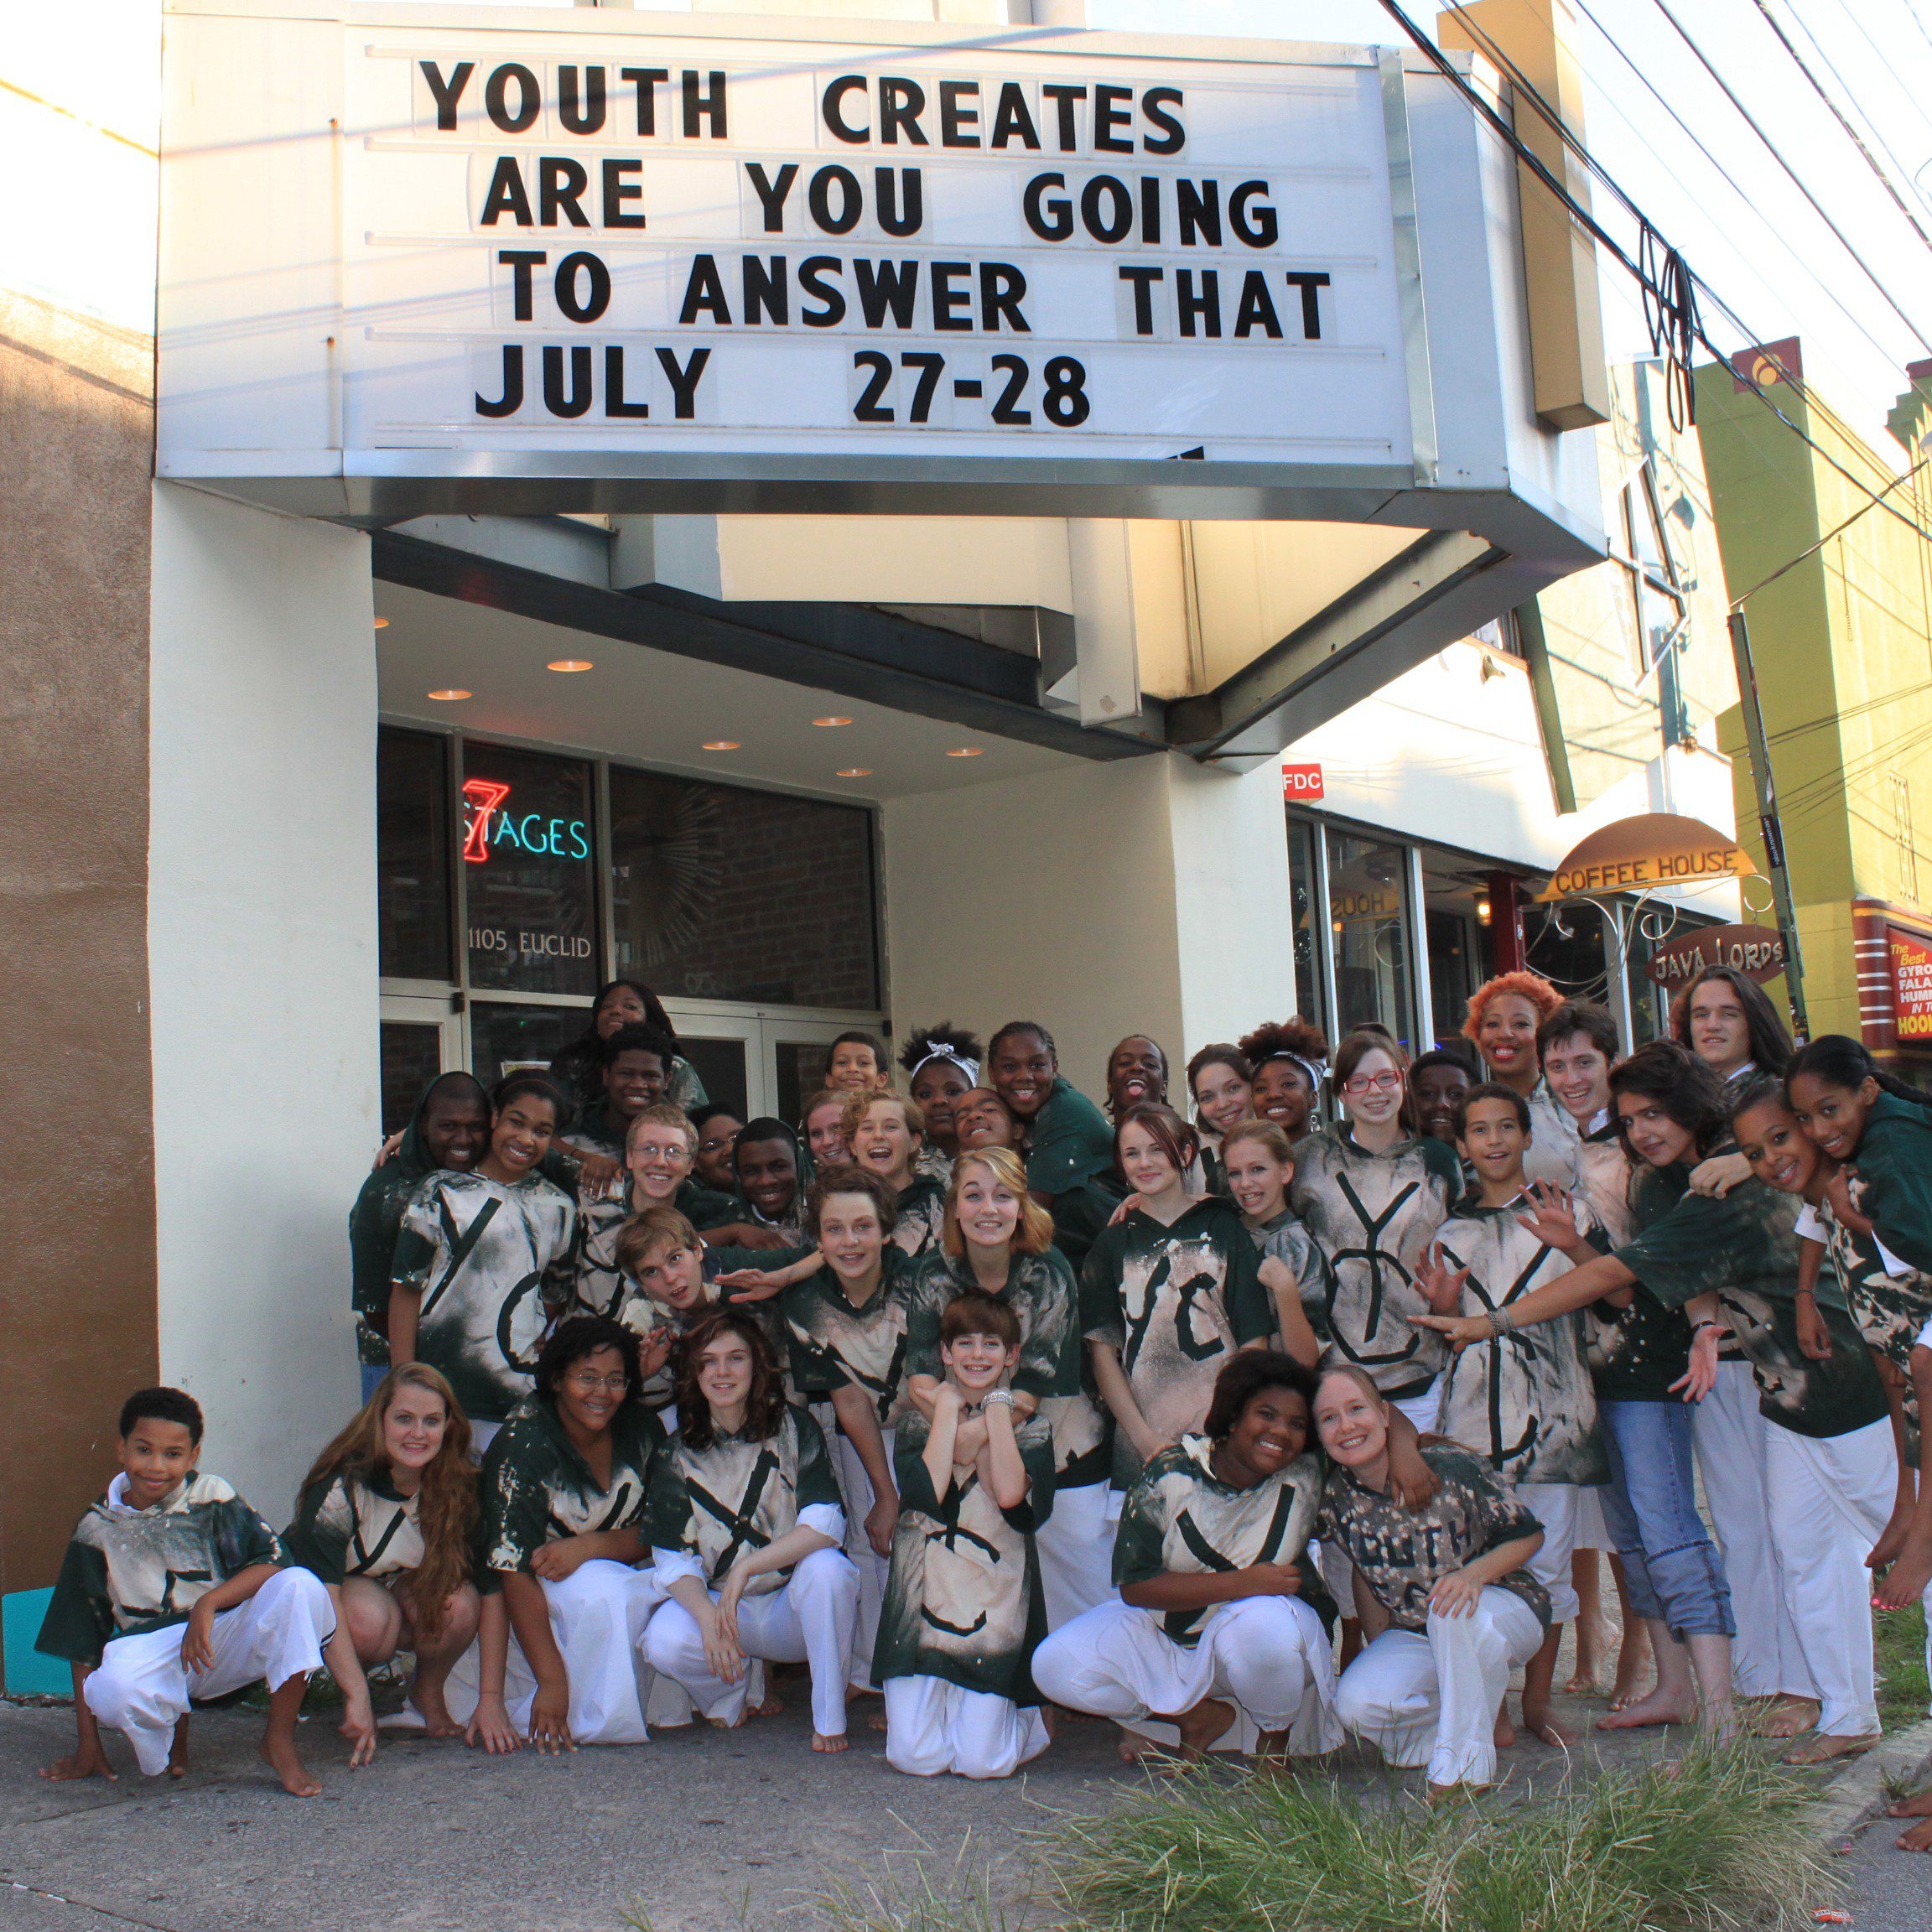 Youth Creates "Are you going to answer that" July 27-28